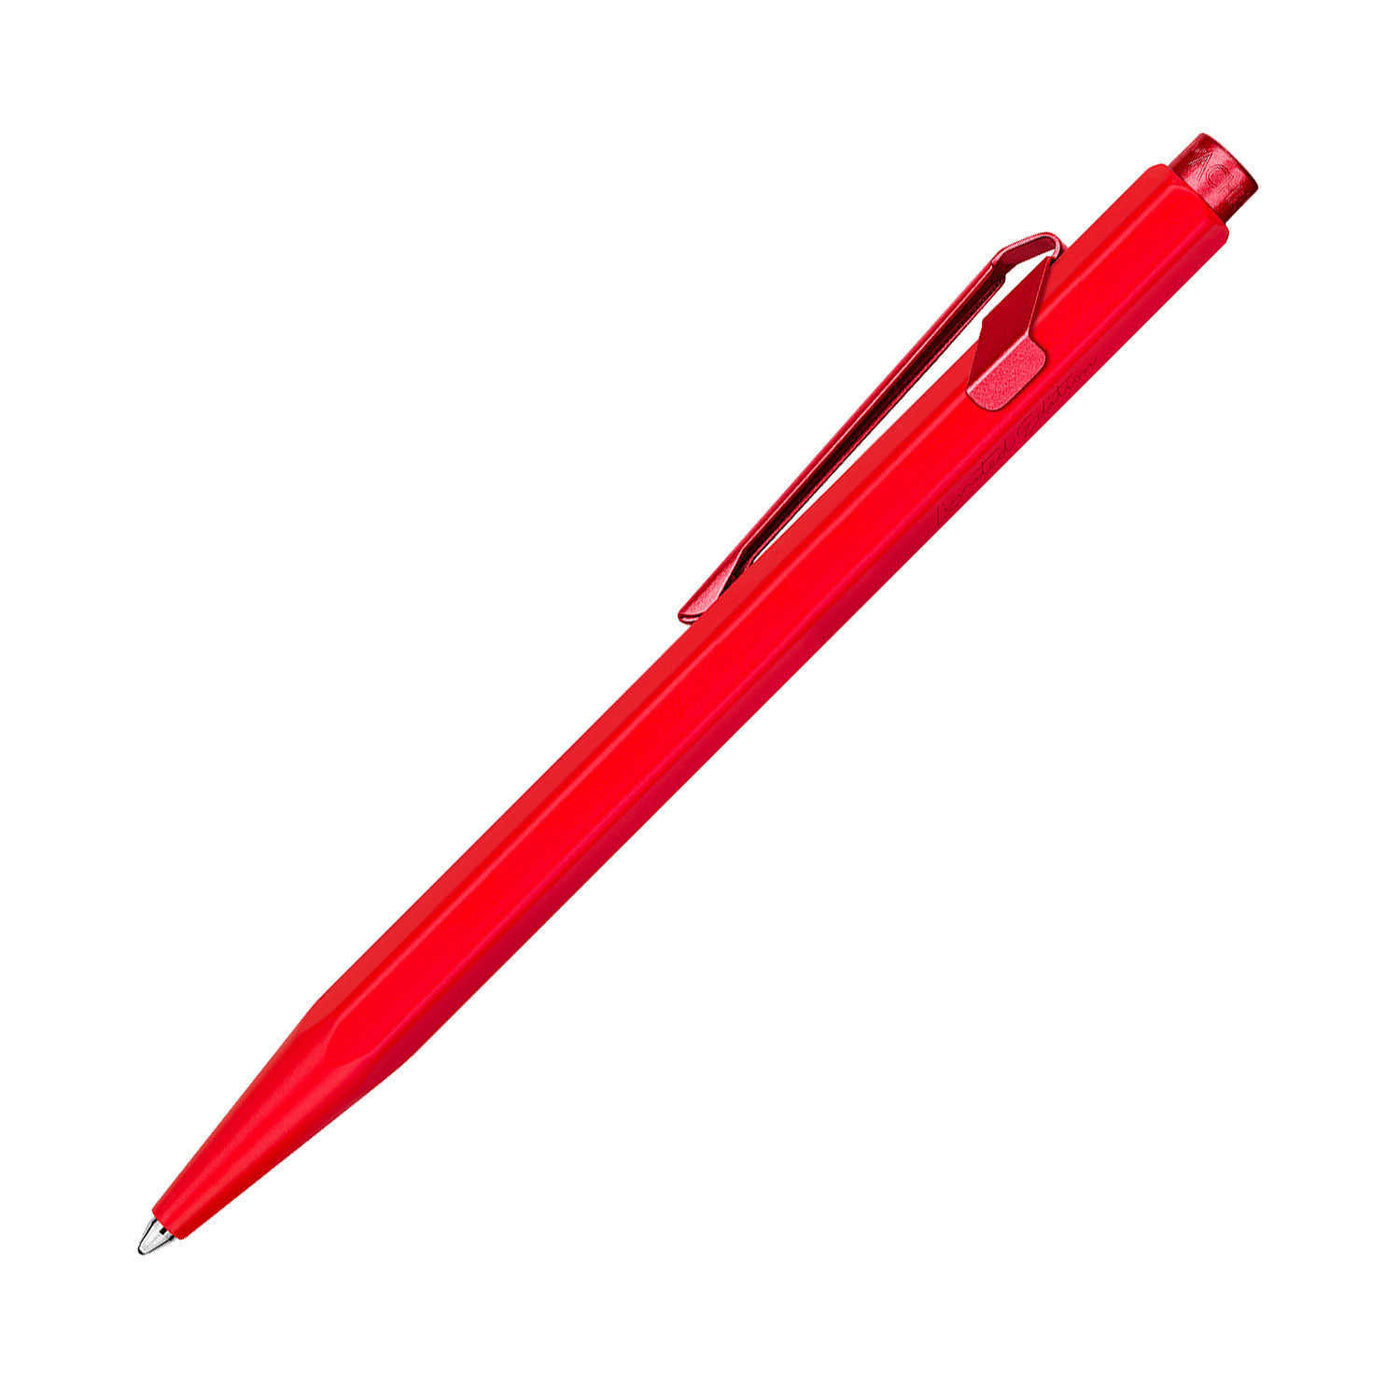 Caran d'Ache 849 Claim Your Style Ball Pen - Scarlet Red (Limited Edition) 3